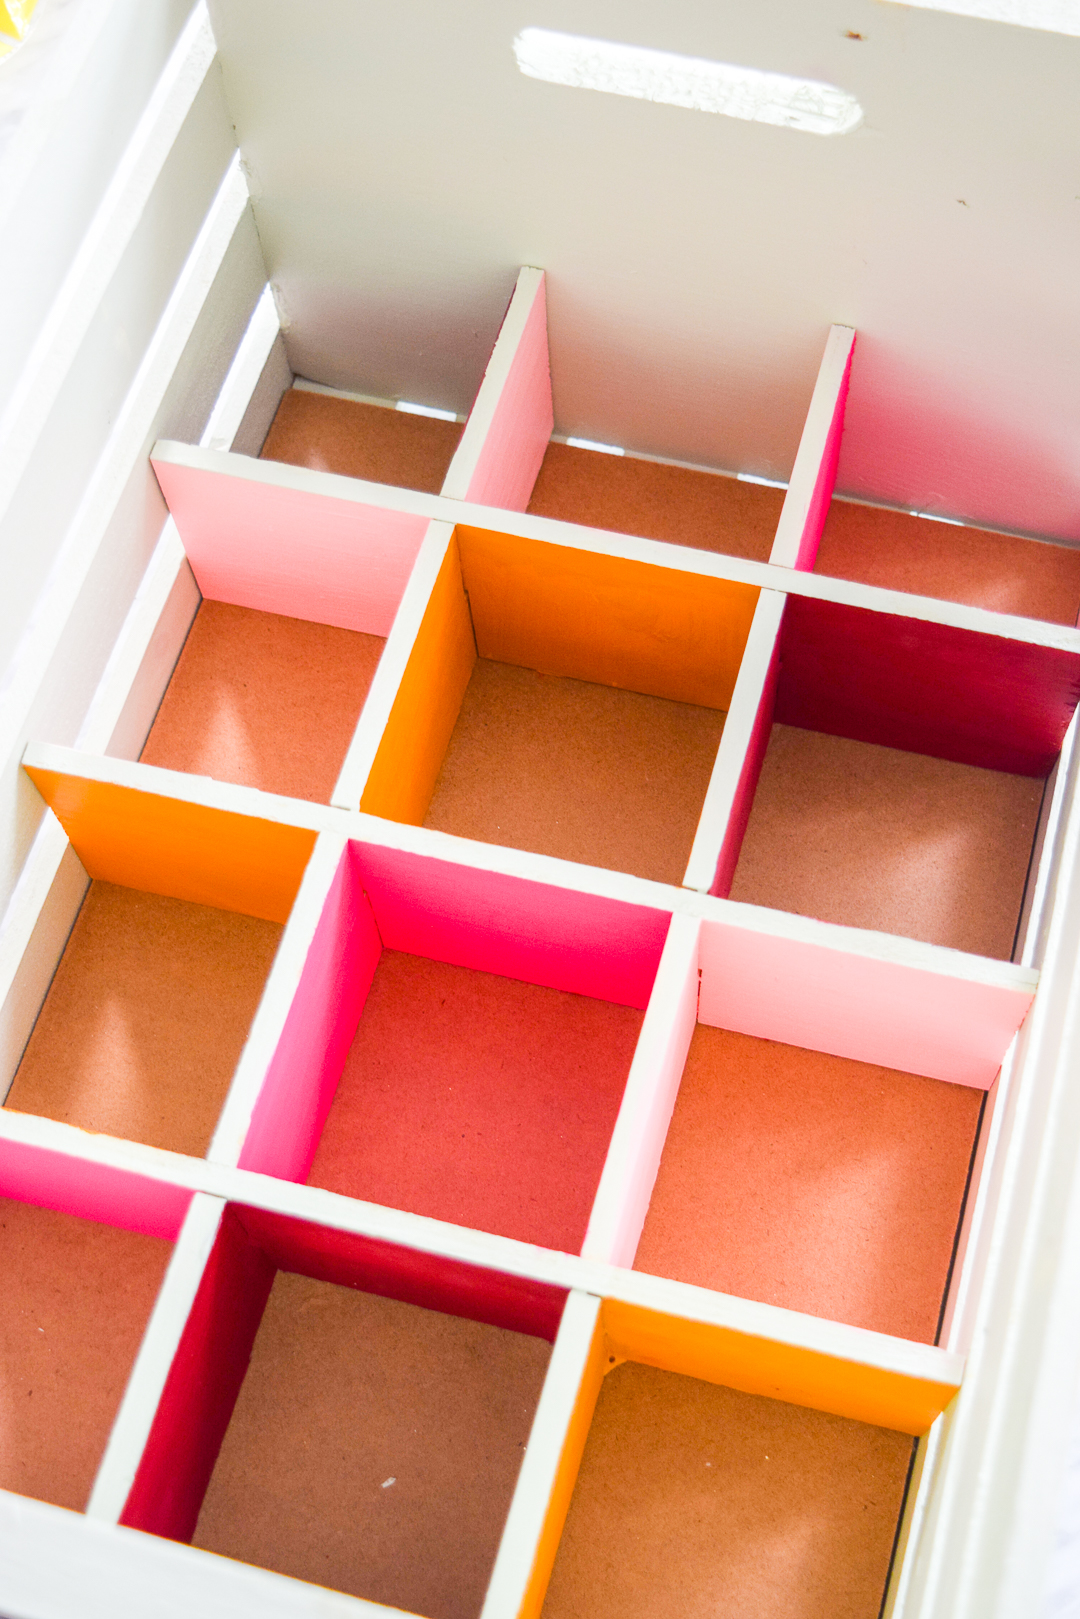 Looking for something that will keep your pieces safe? Try my DIY Colourful Ornament Storage Crate, and none of your ornaments will ever get broken again!